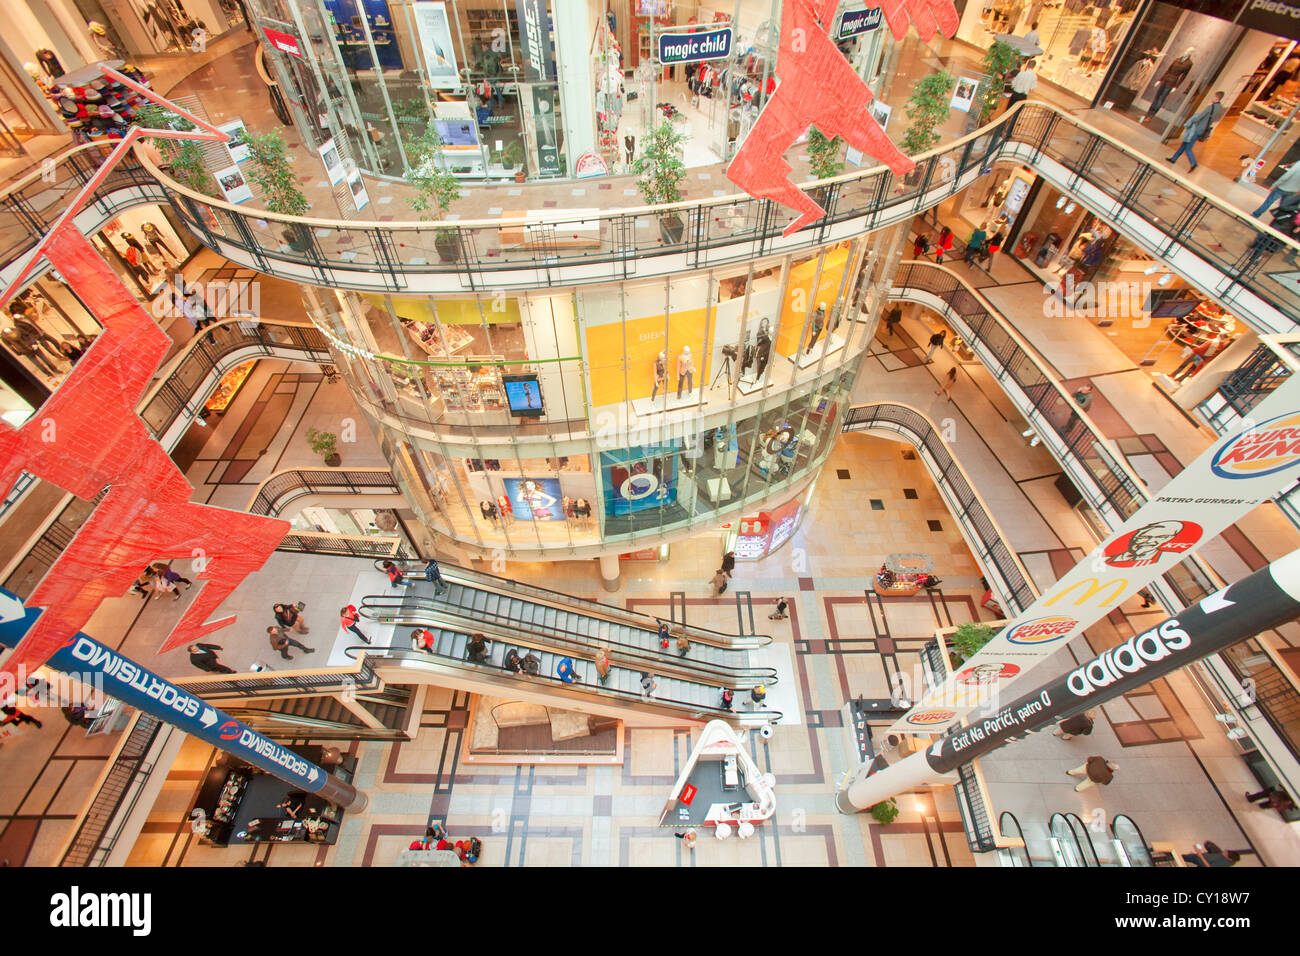 Mall Interior High Resolution Stock Photography and Images - Alamy